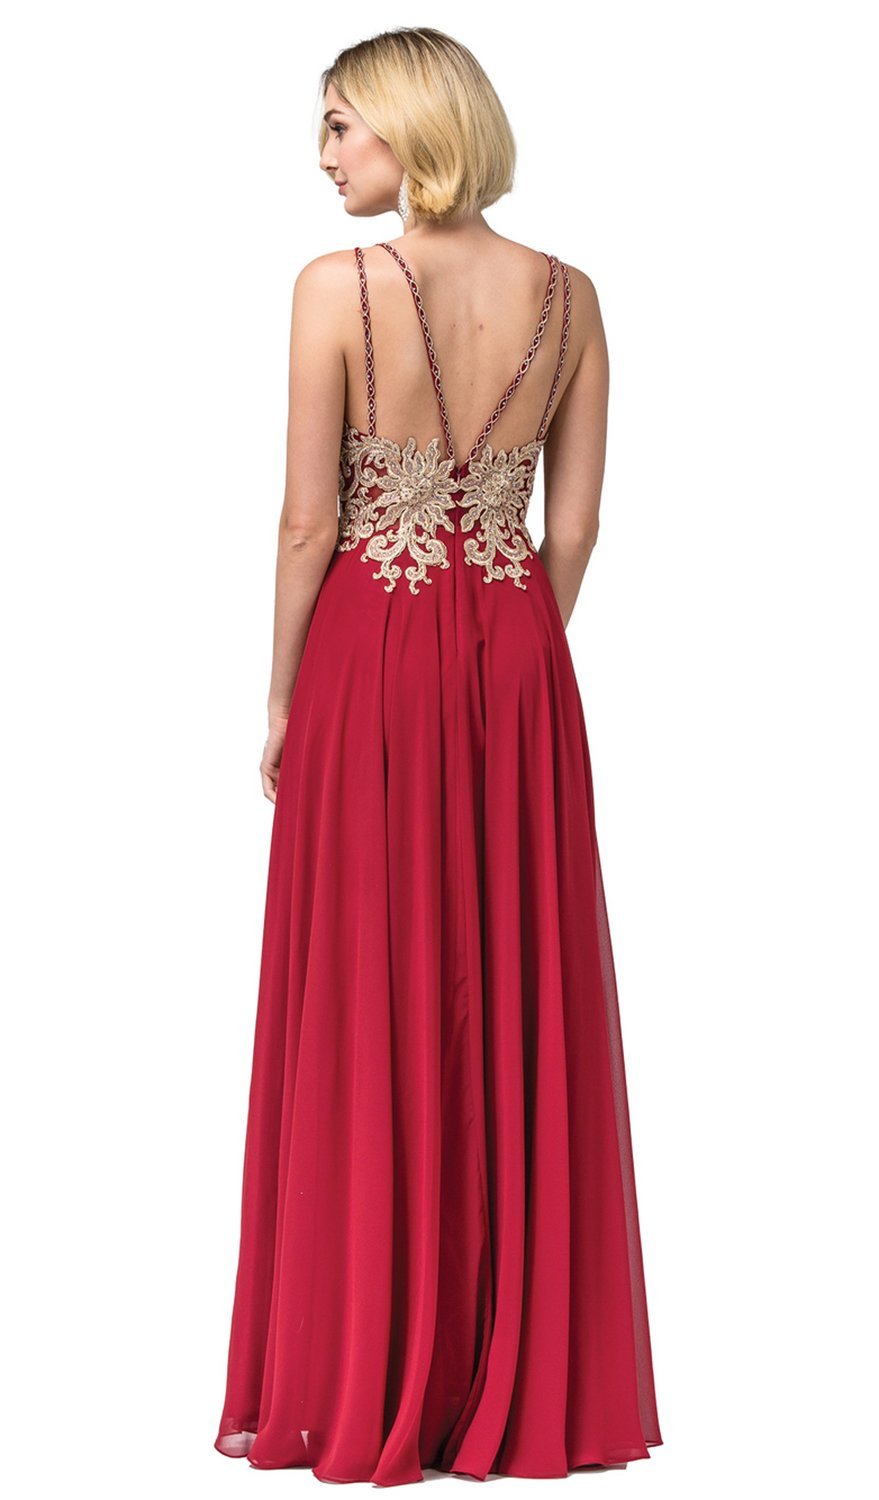 Dancing Queen - 2890 Embroidered Plunging V-neck A-line Dress in Red and Gold